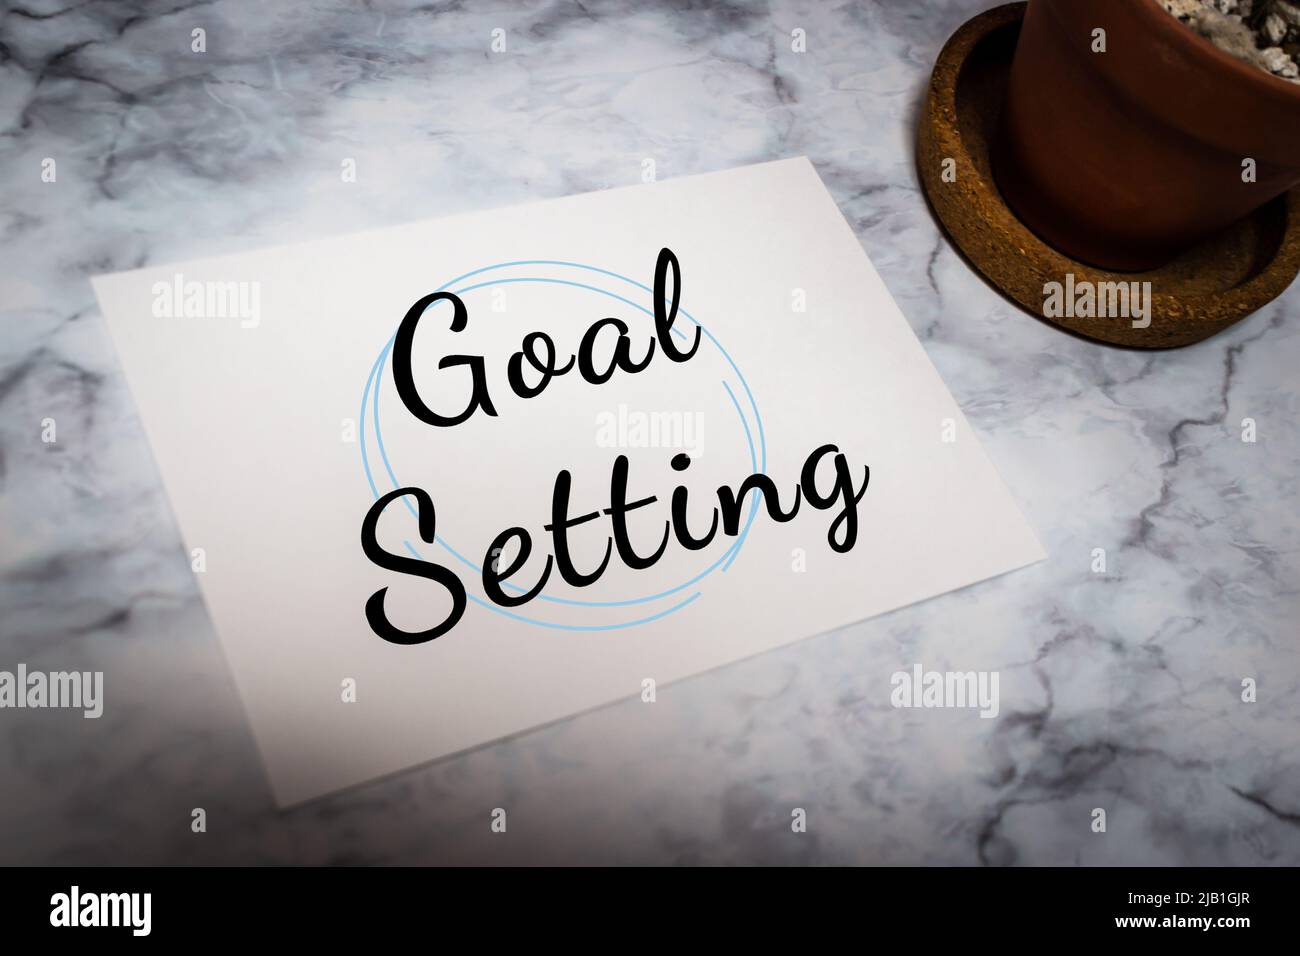 Handwriting Message card “Goal Setting: on white marble table with cactus. Action of setting personal goals, task, business & work commitment concept Stock Photo